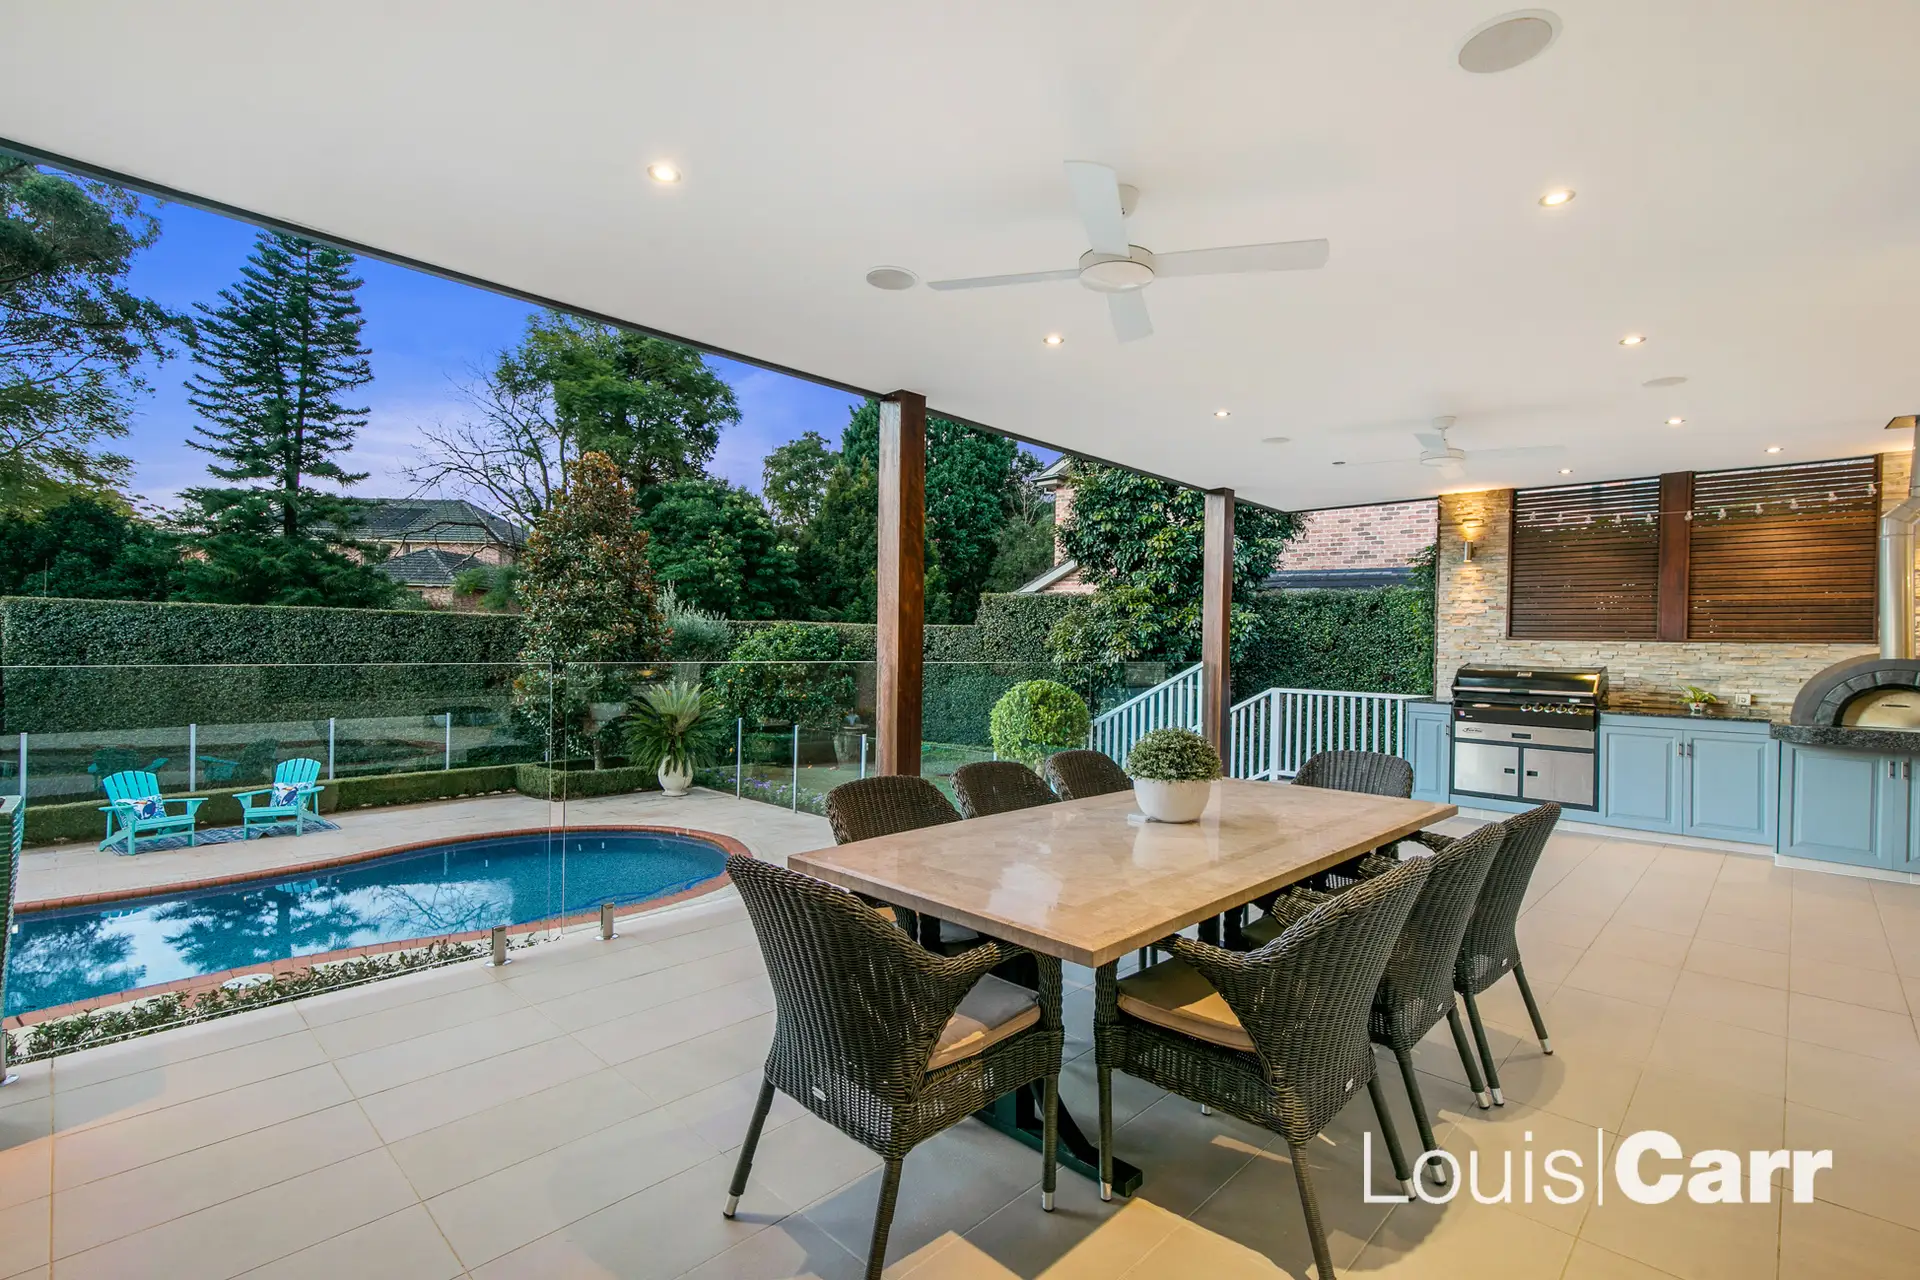 Photo #1: 16 Bellbird Drive, West Pennant Hills - Sold by Louis Carr Real Estate